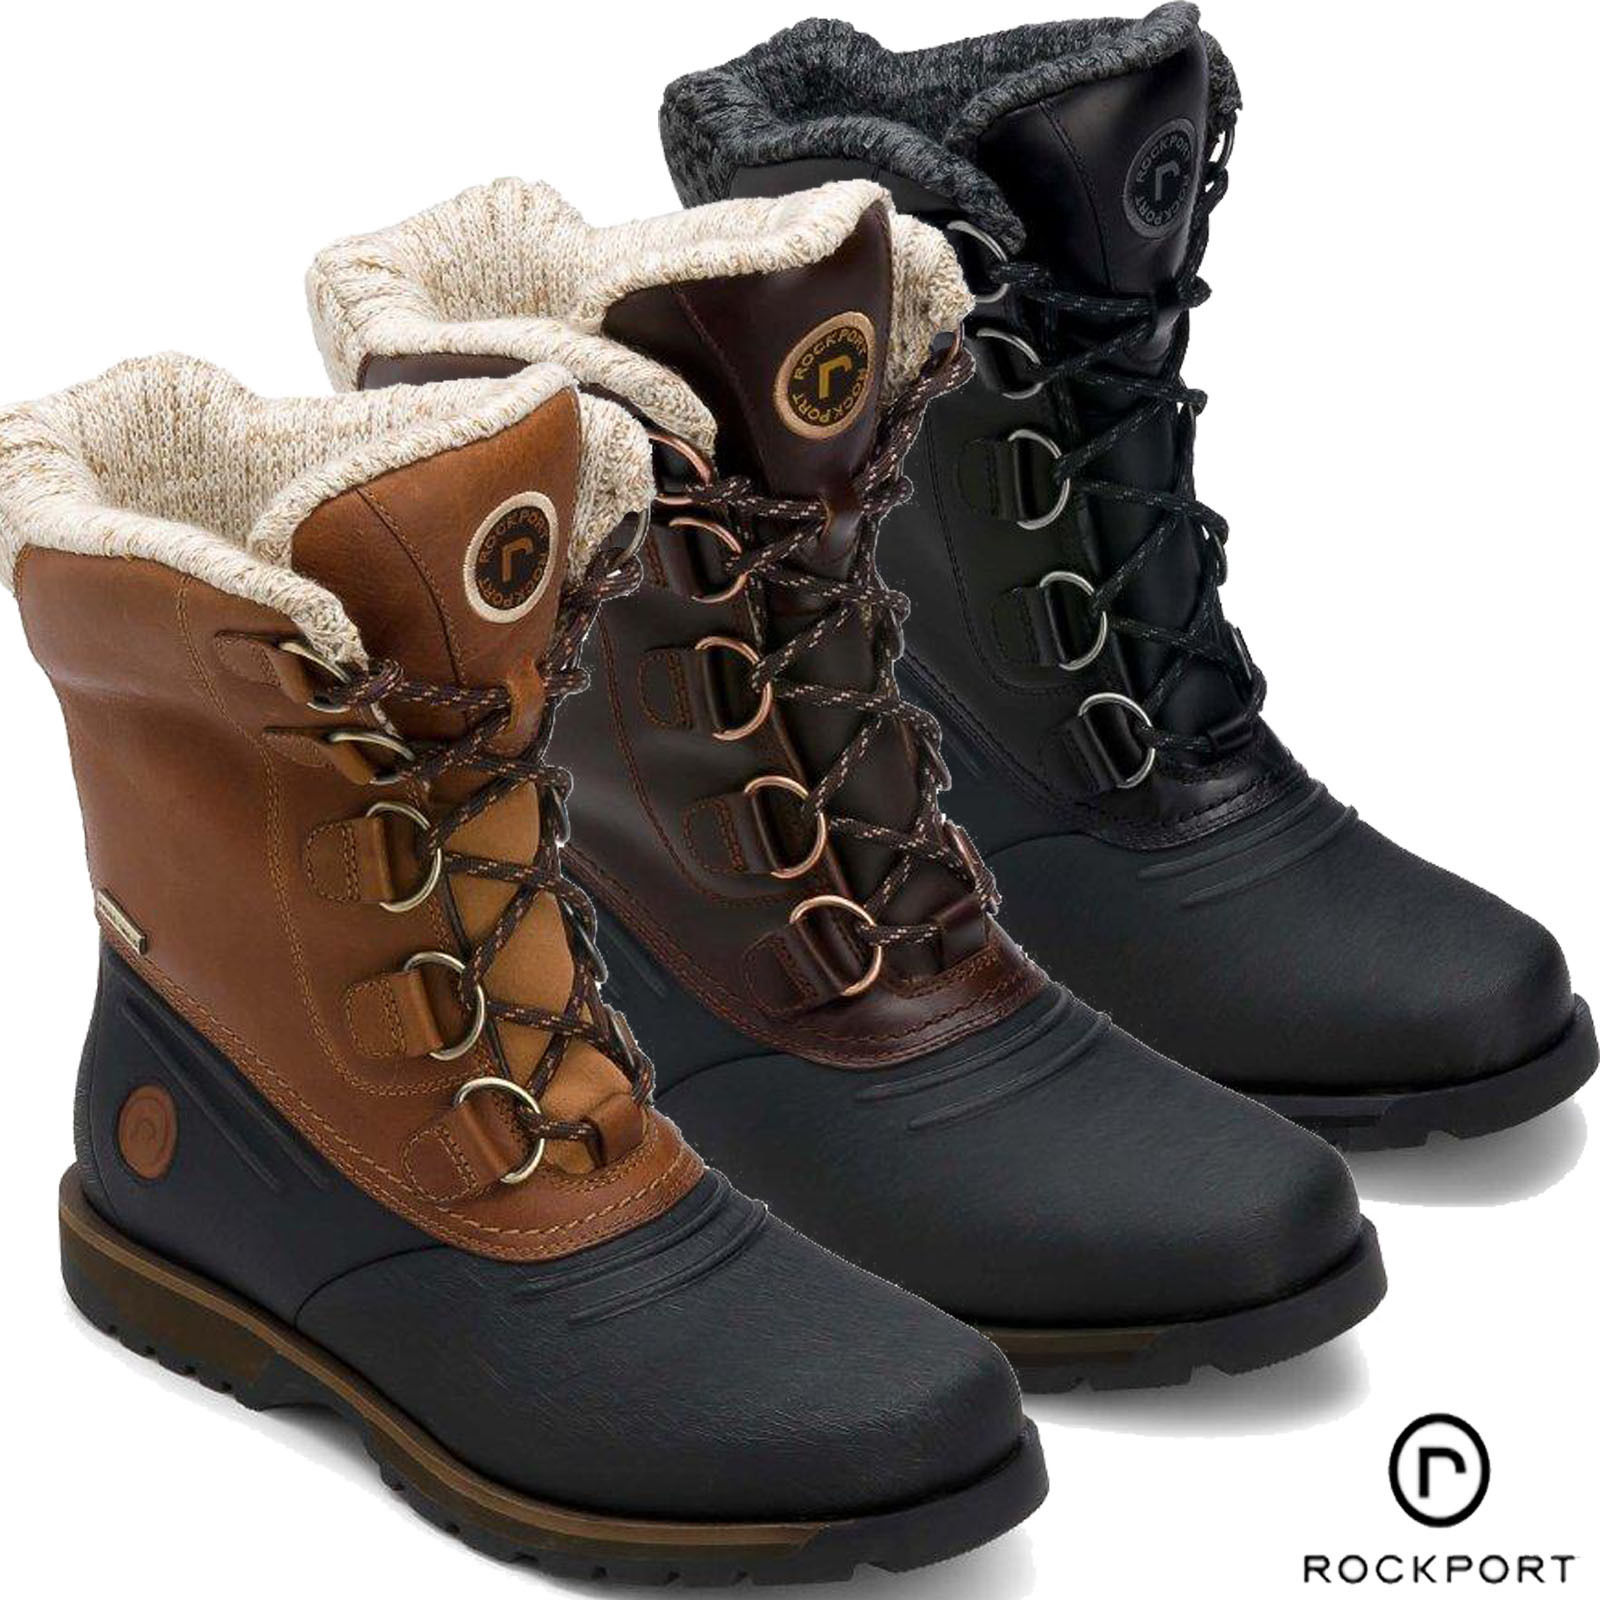 How to Stylishly Wear Mens Winter Boots